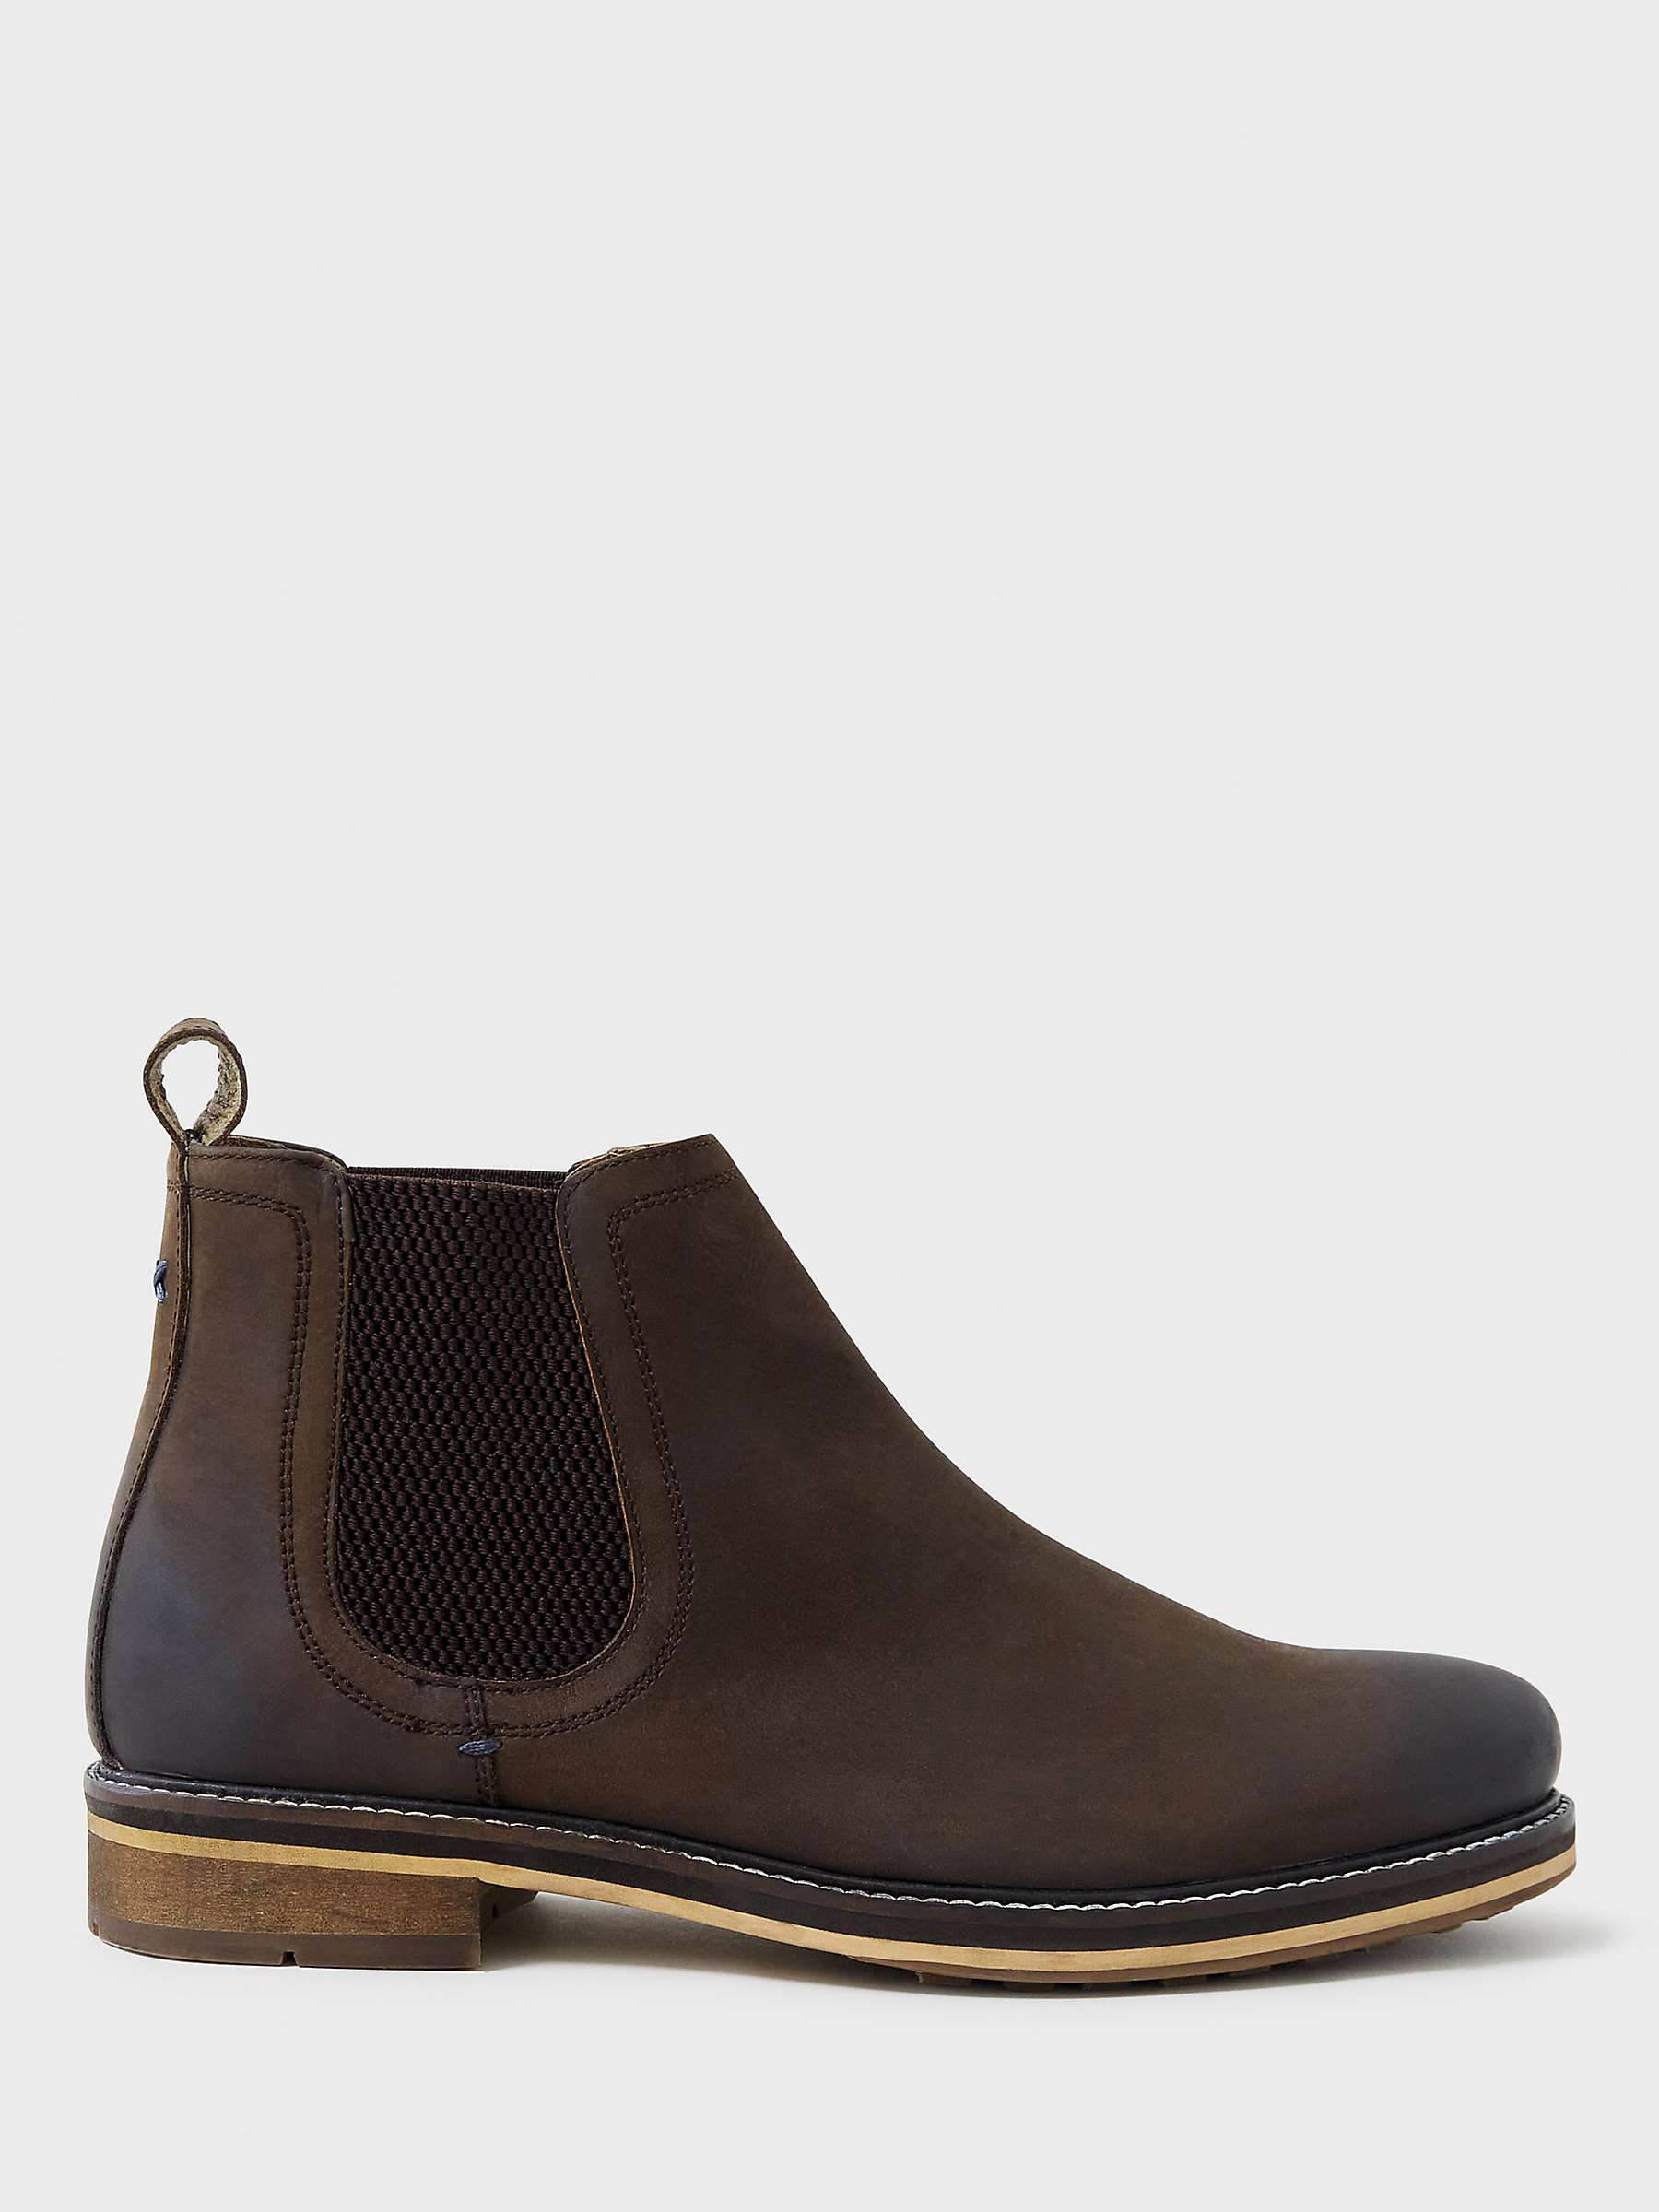 Buy Crew Clothing Parker Leather Chelsea Boots, Dark Brown Online at johnlewis.com